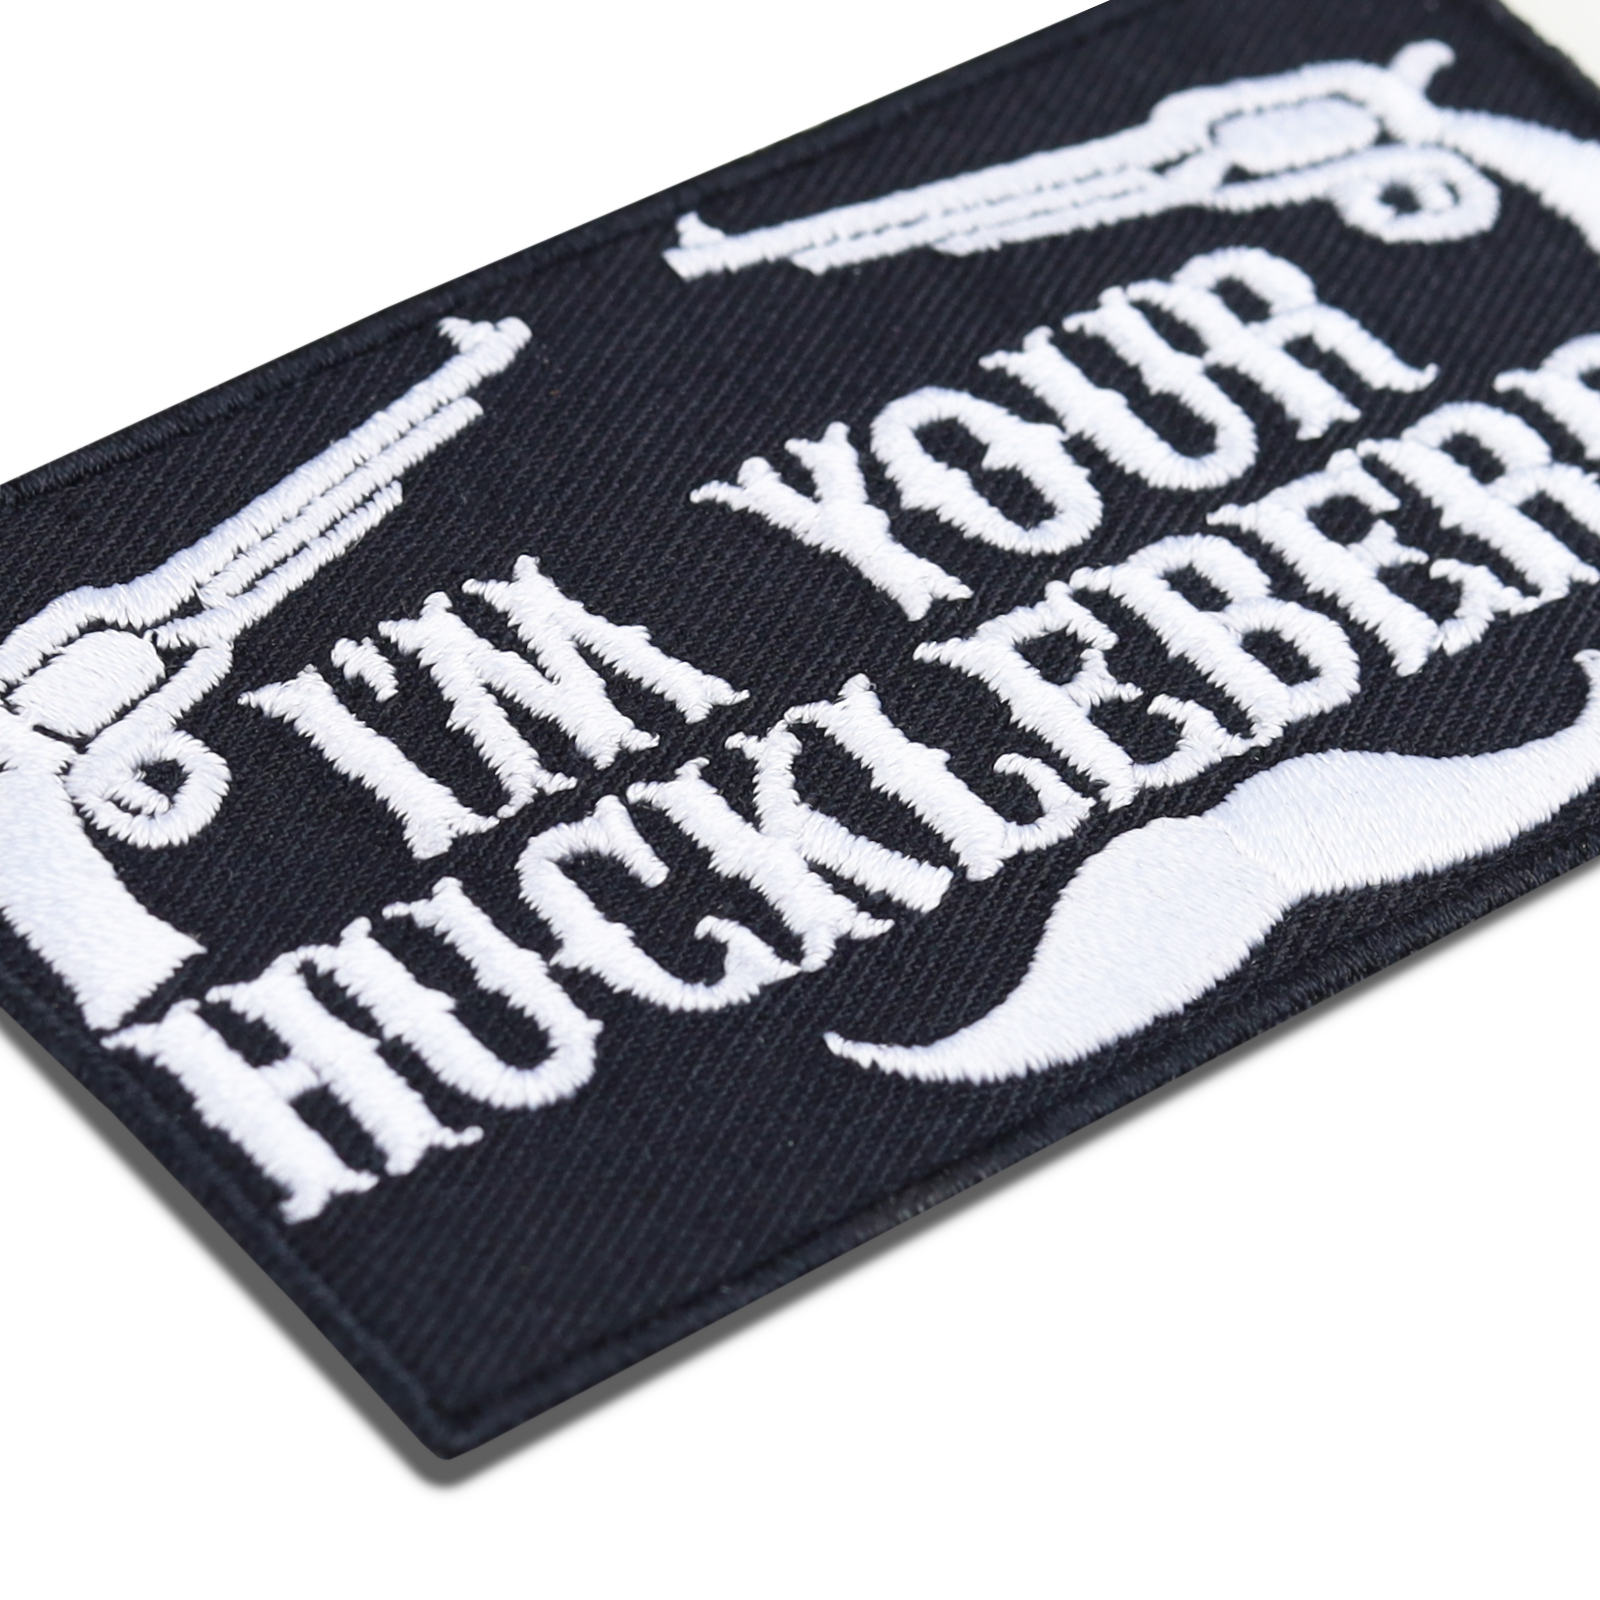 I'm your Huckleberry - Patch